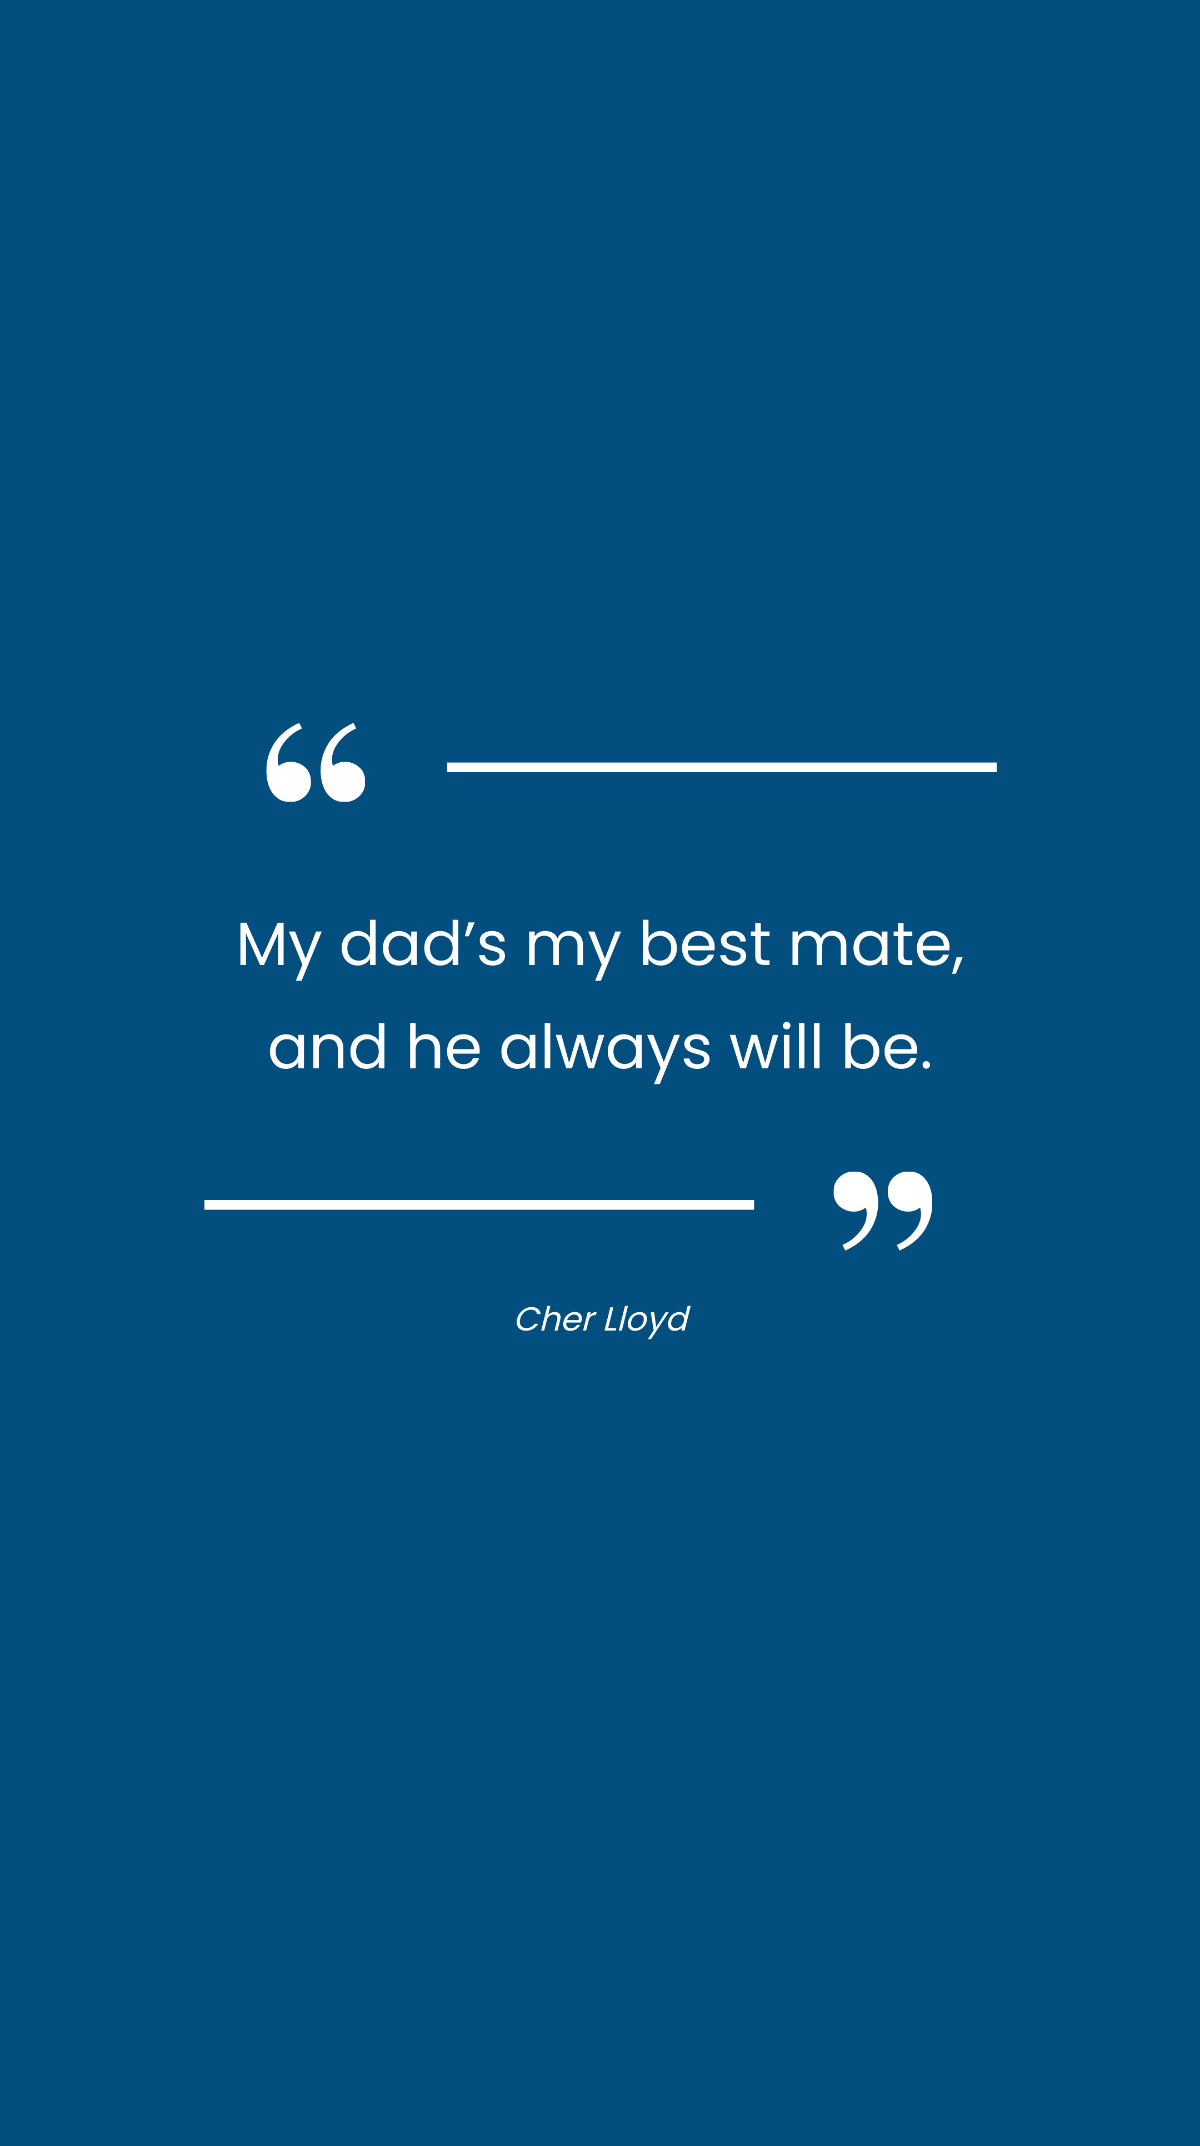 Cher Lloyd - My dad’s my best mate, and he always will be. Template